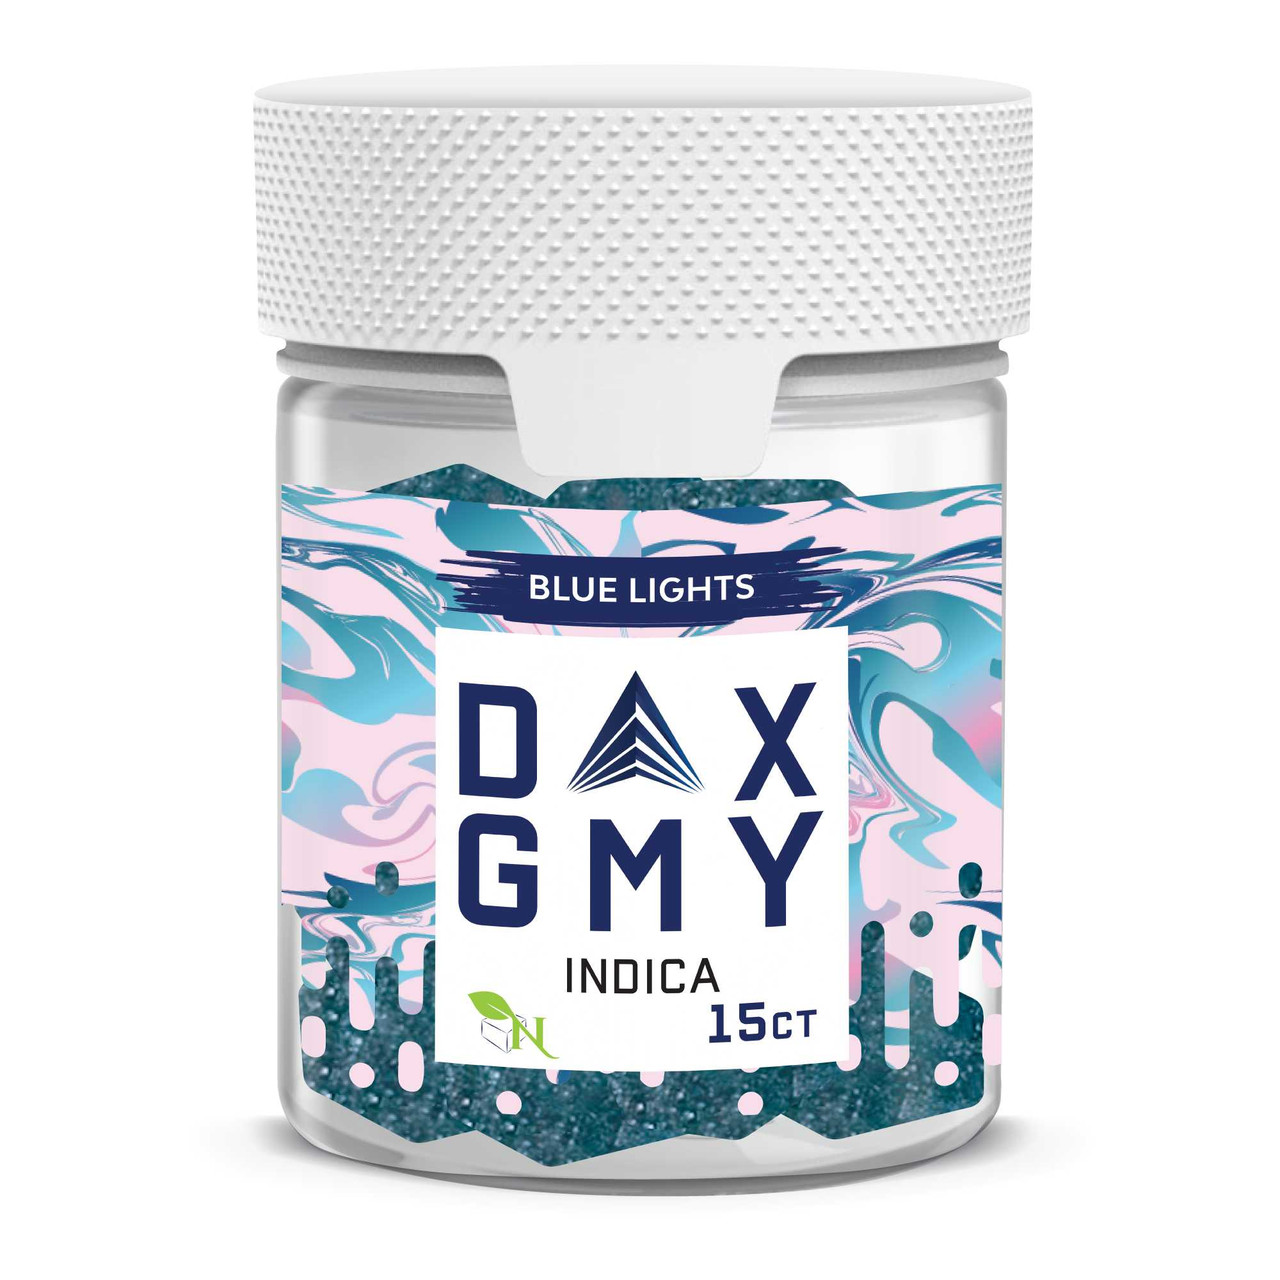 DELTA 10 By Agift From Nature CBD-The Ultimate Review of the Top DELTA 10 Product